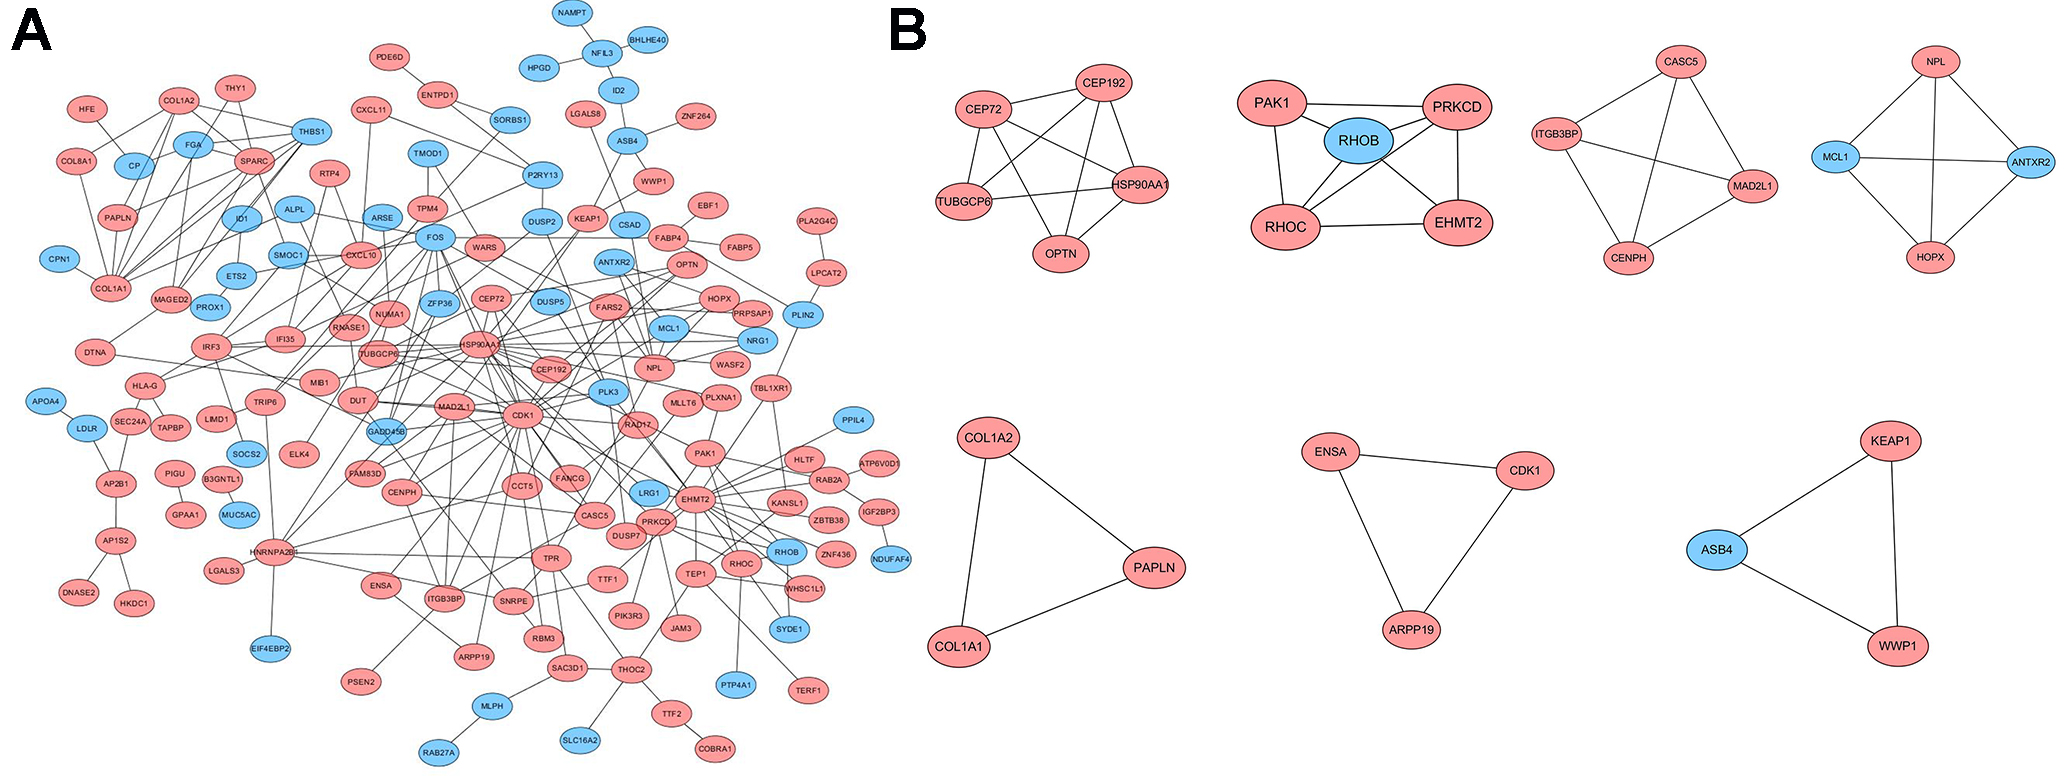 Protein-protein interaction (PPI) network and core modules of PPI network. (A) High and low expression genes; (B) Core modules. The pink circles represent high expression genes, and the blue circles represent low expression genes.